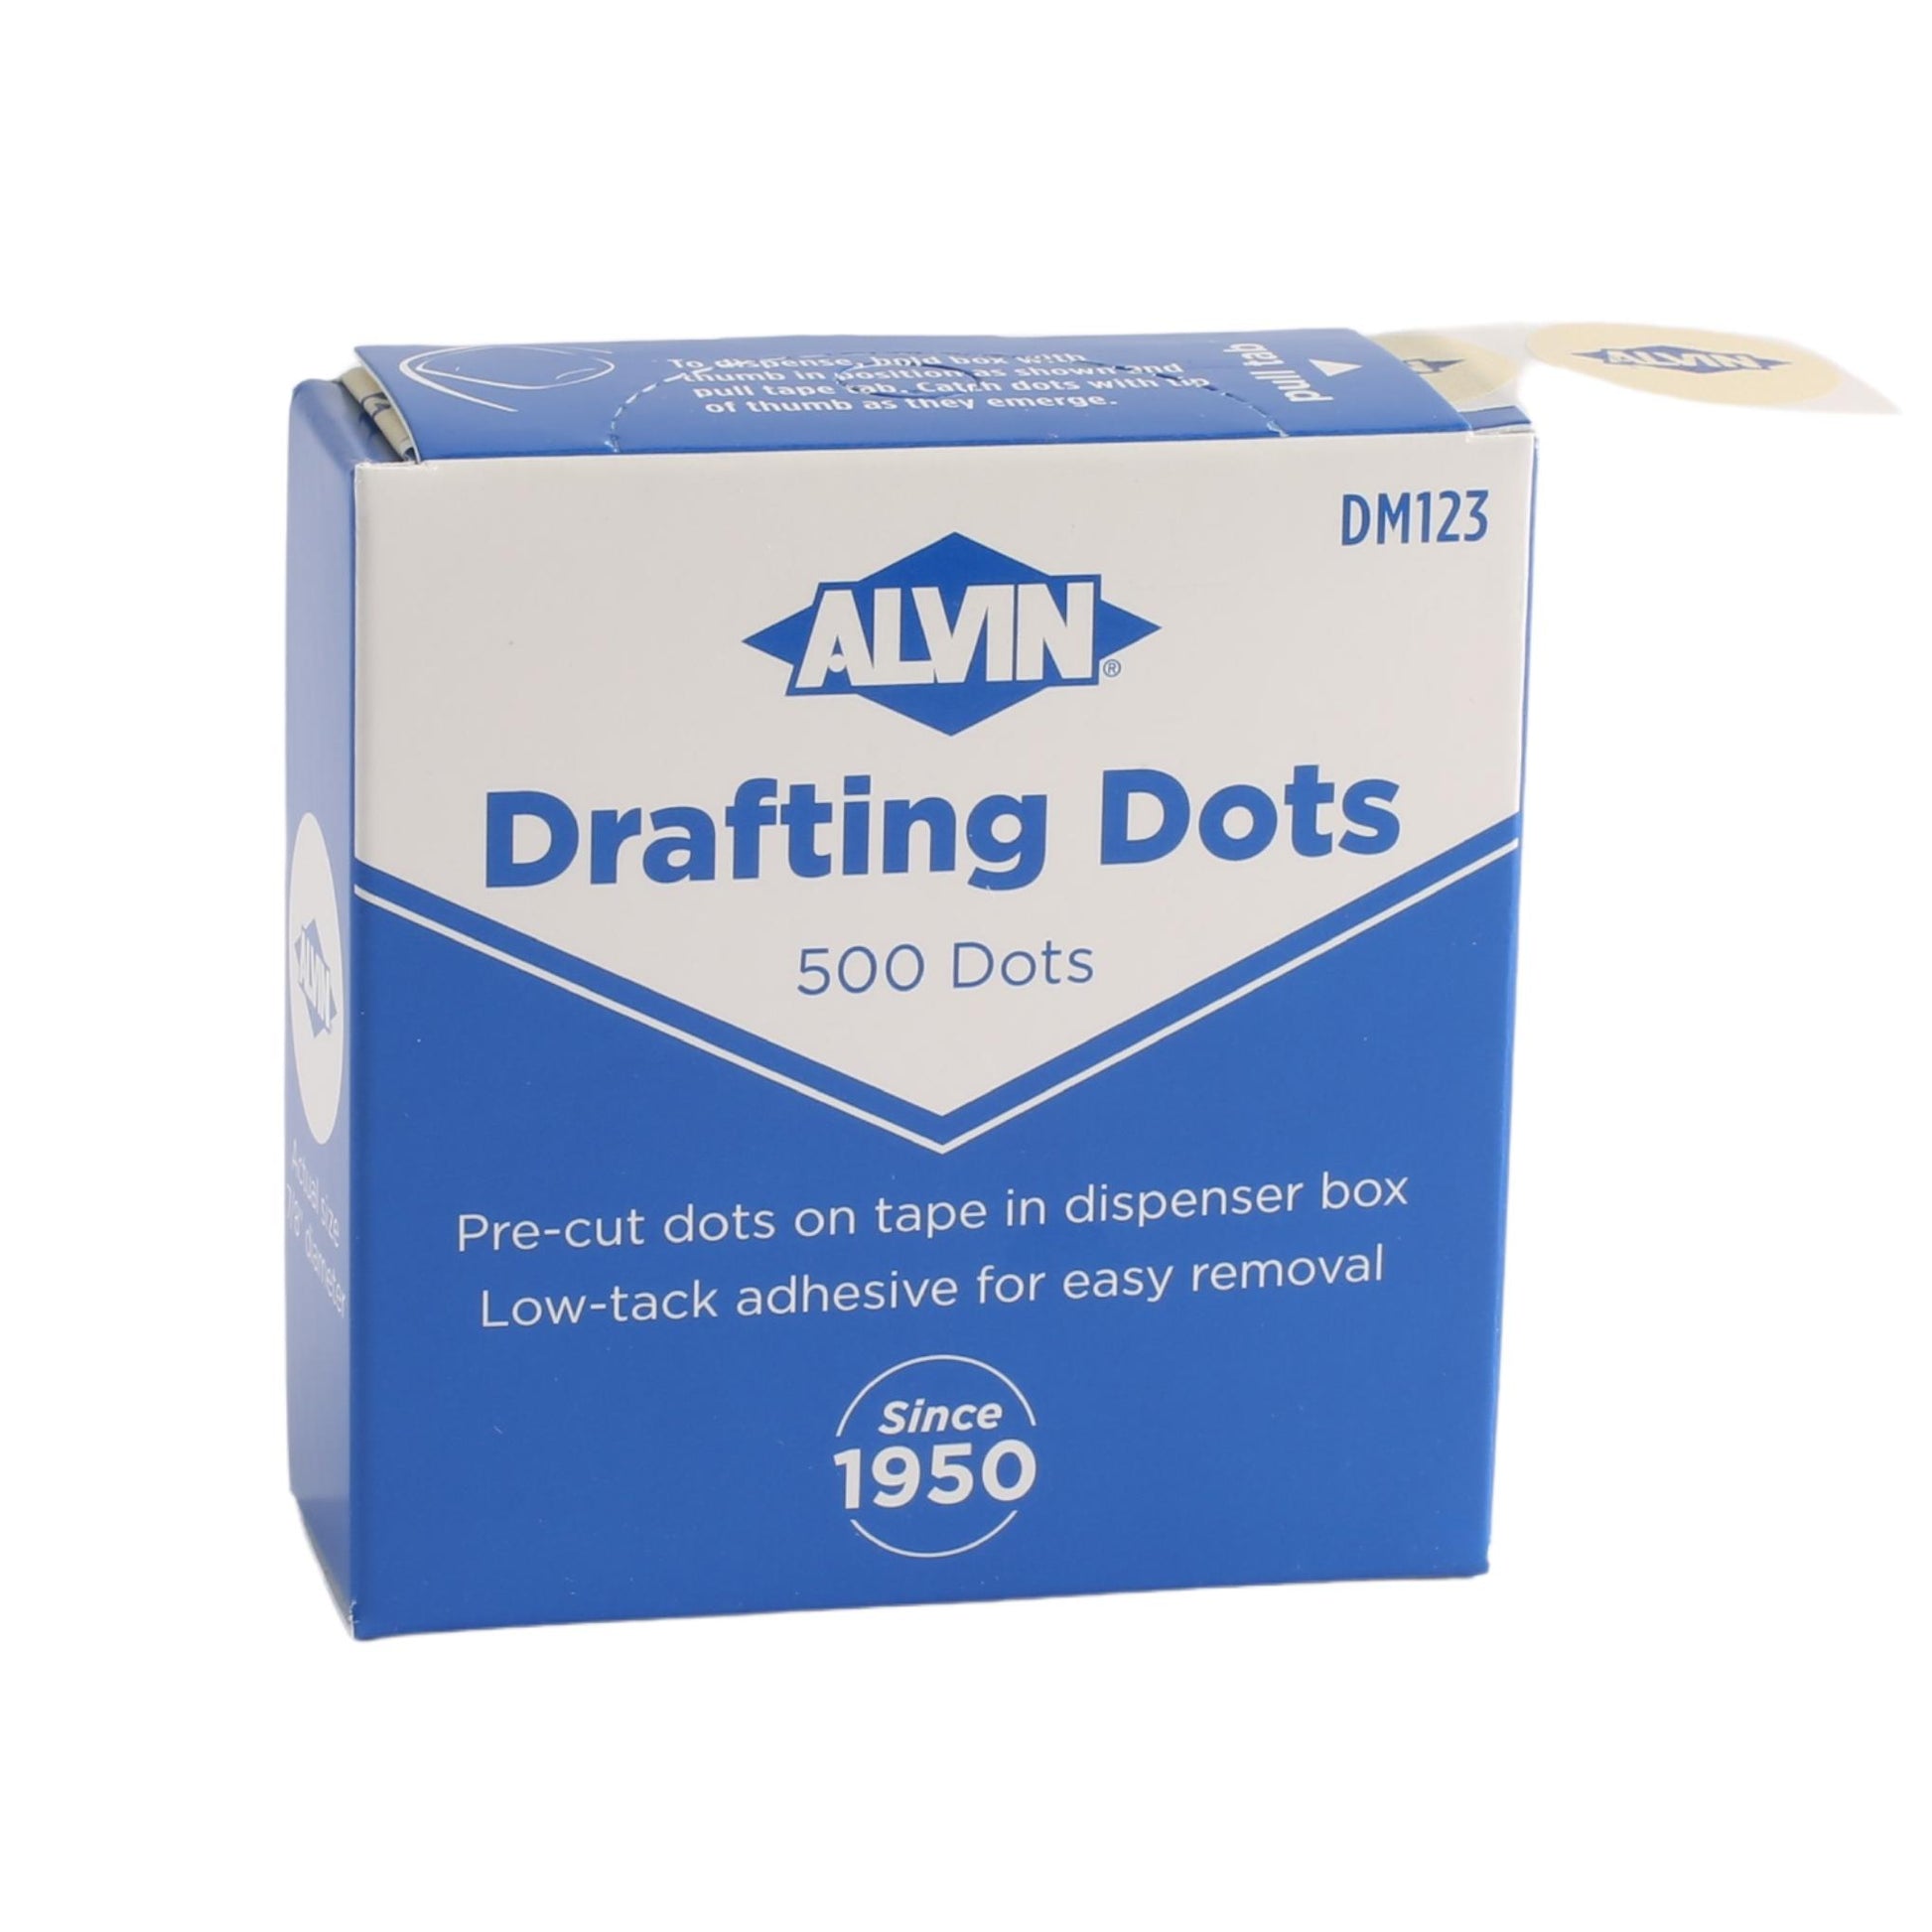 ALVIN DM123 Drafting Dots Pre-cut dots on tape in dispenser box low-tack adhesive for easy removal